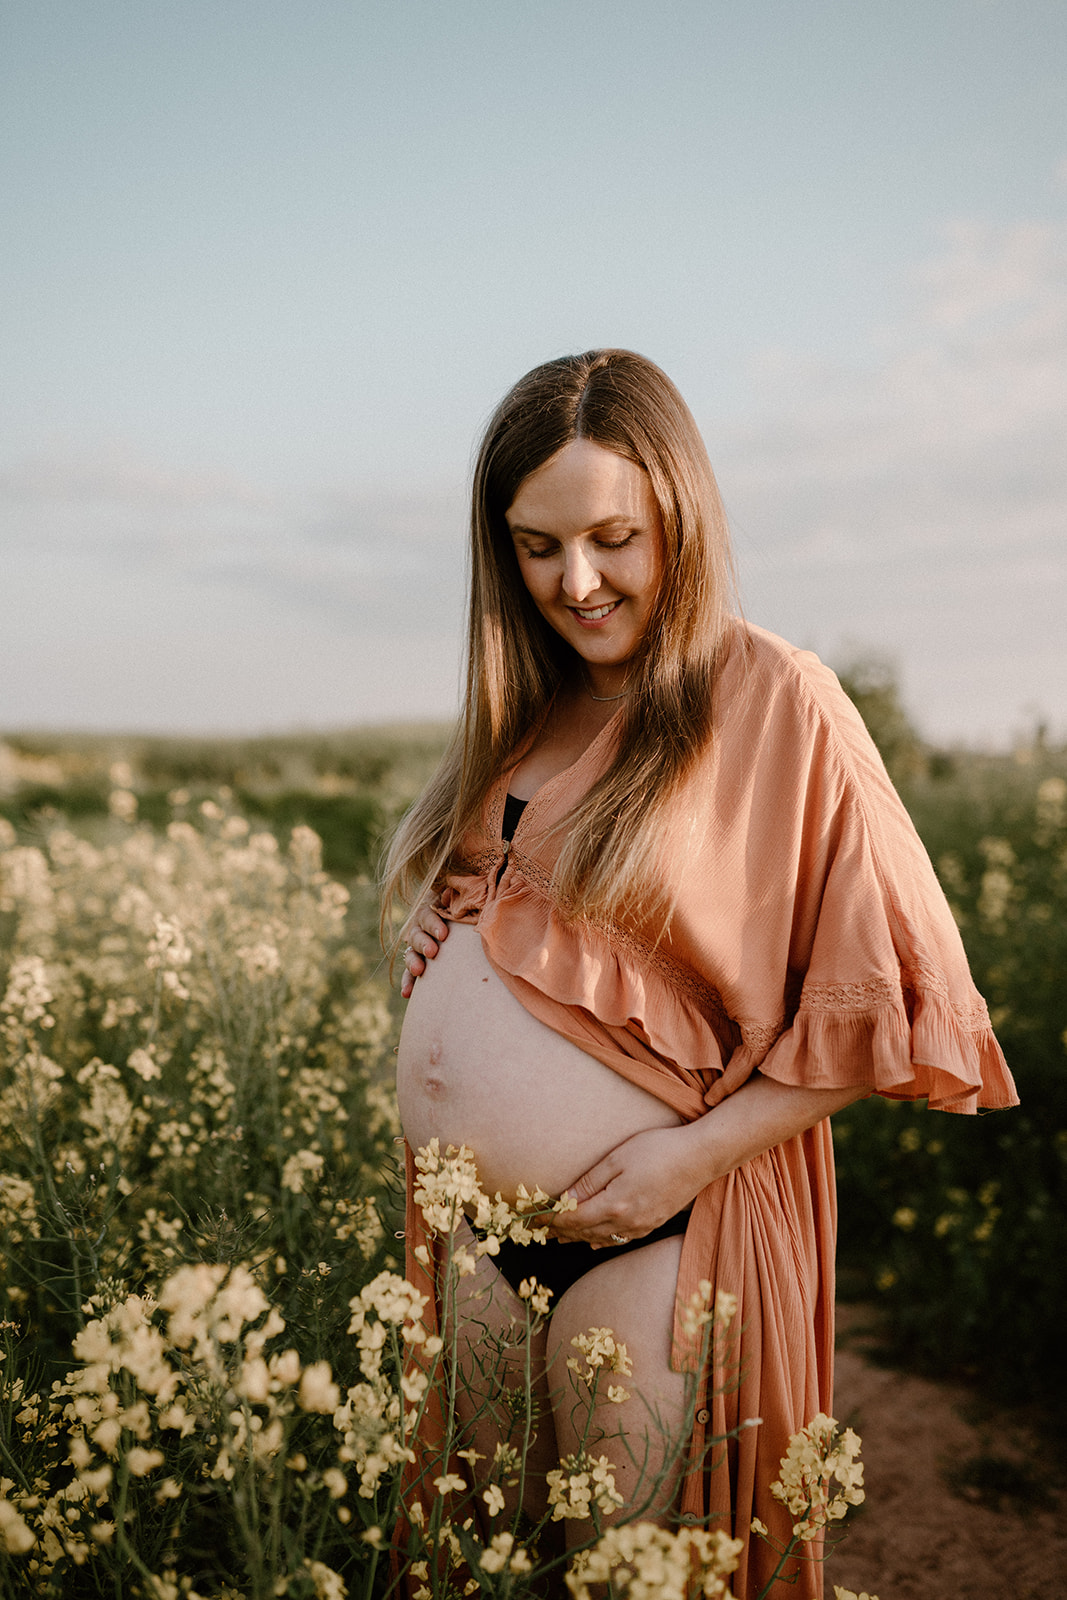 Mother looks at bump during outdoor maternity session at golden hour.